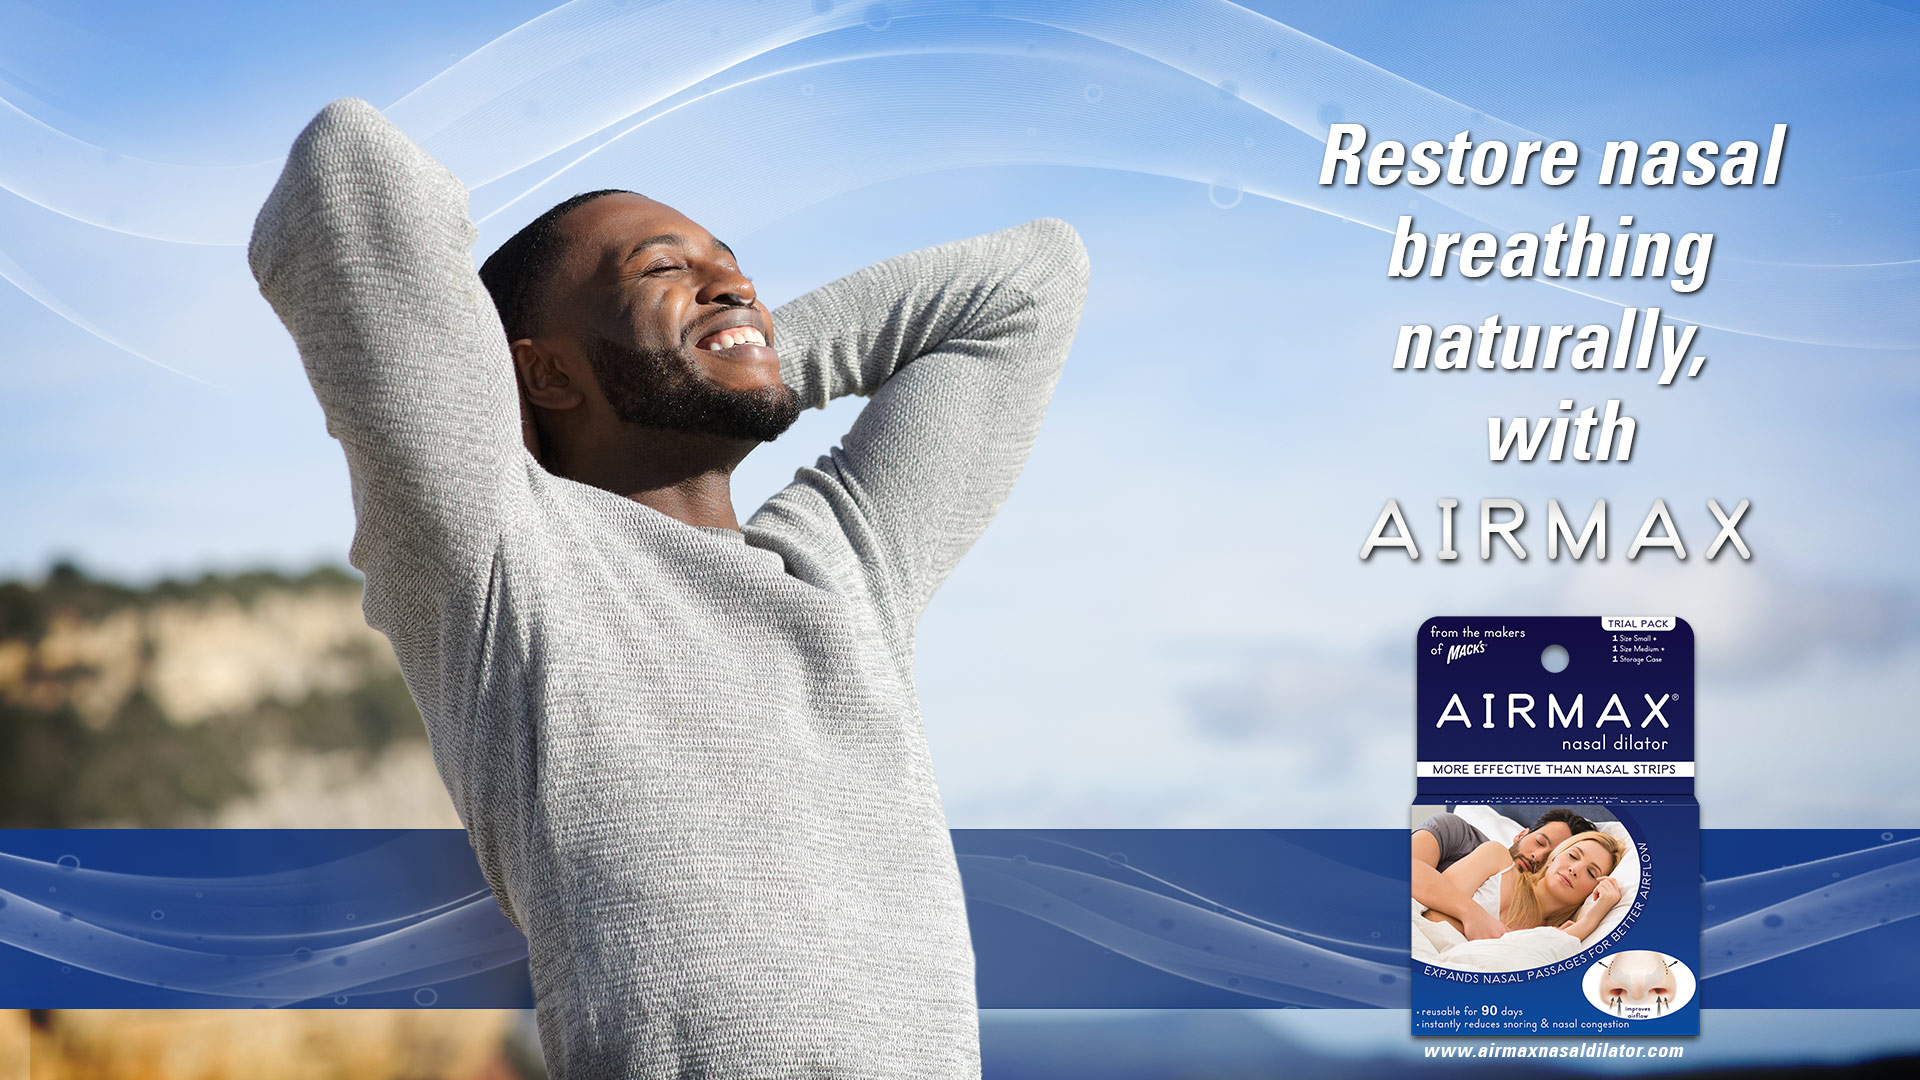 airmax the best internal nasal dilator help breathe better and sleep better and is better than nasal strips